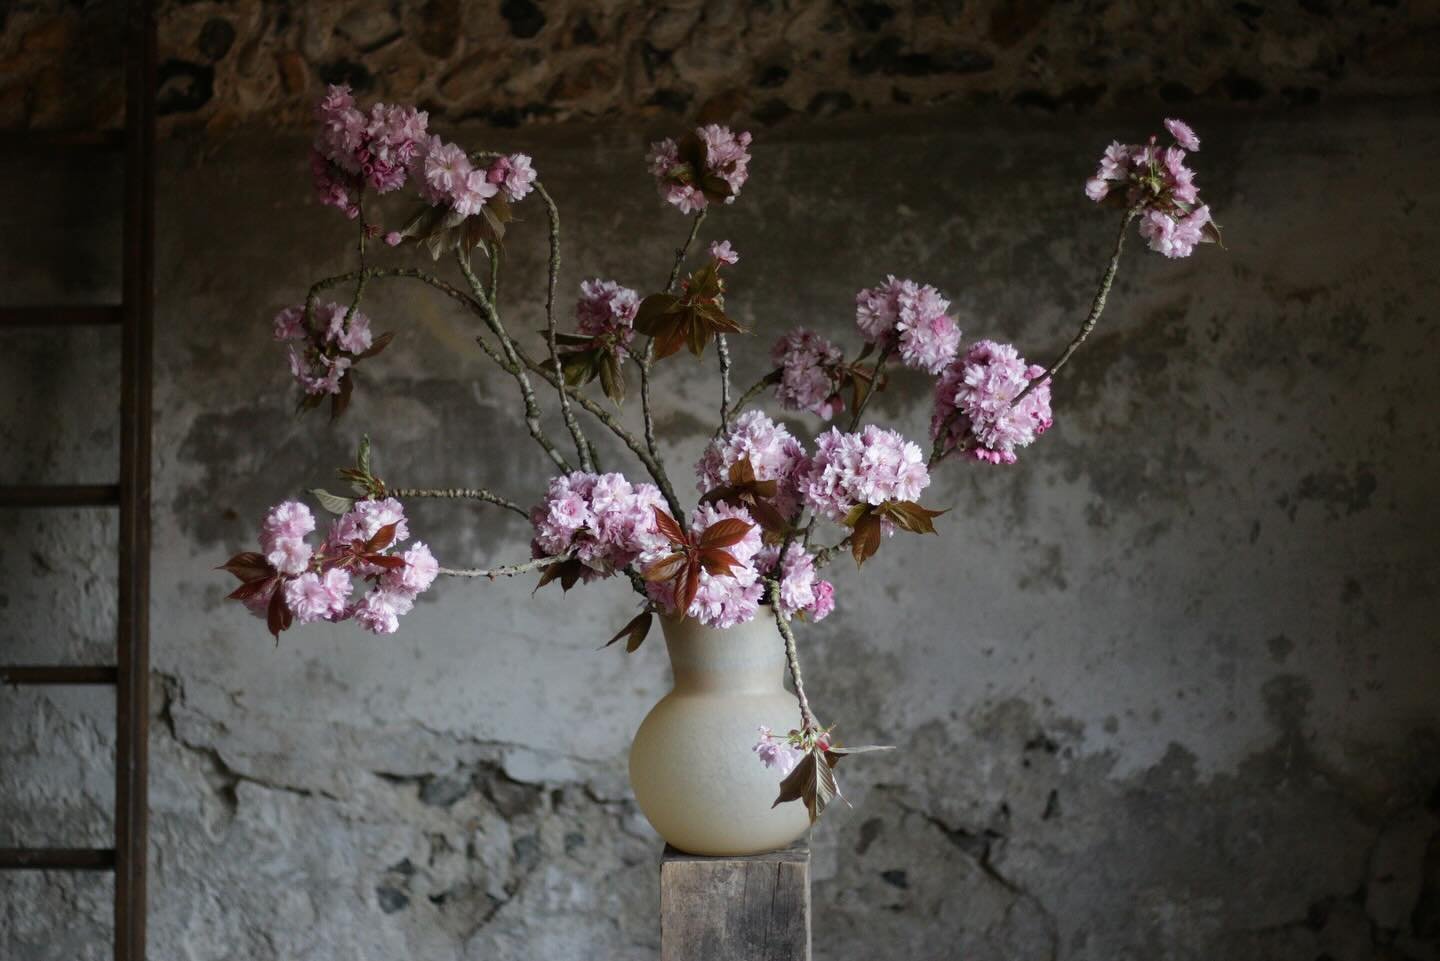 Pink cherry blossom. Let me count the ways I love you. 

Number 1. Artfully arranged by me in a big @anthropologie vase and beautifully photographed by @annasflowerfarm 

#cherryblossom #seasonled #attheuntamededge #gatherandcreate #locallygrown #for